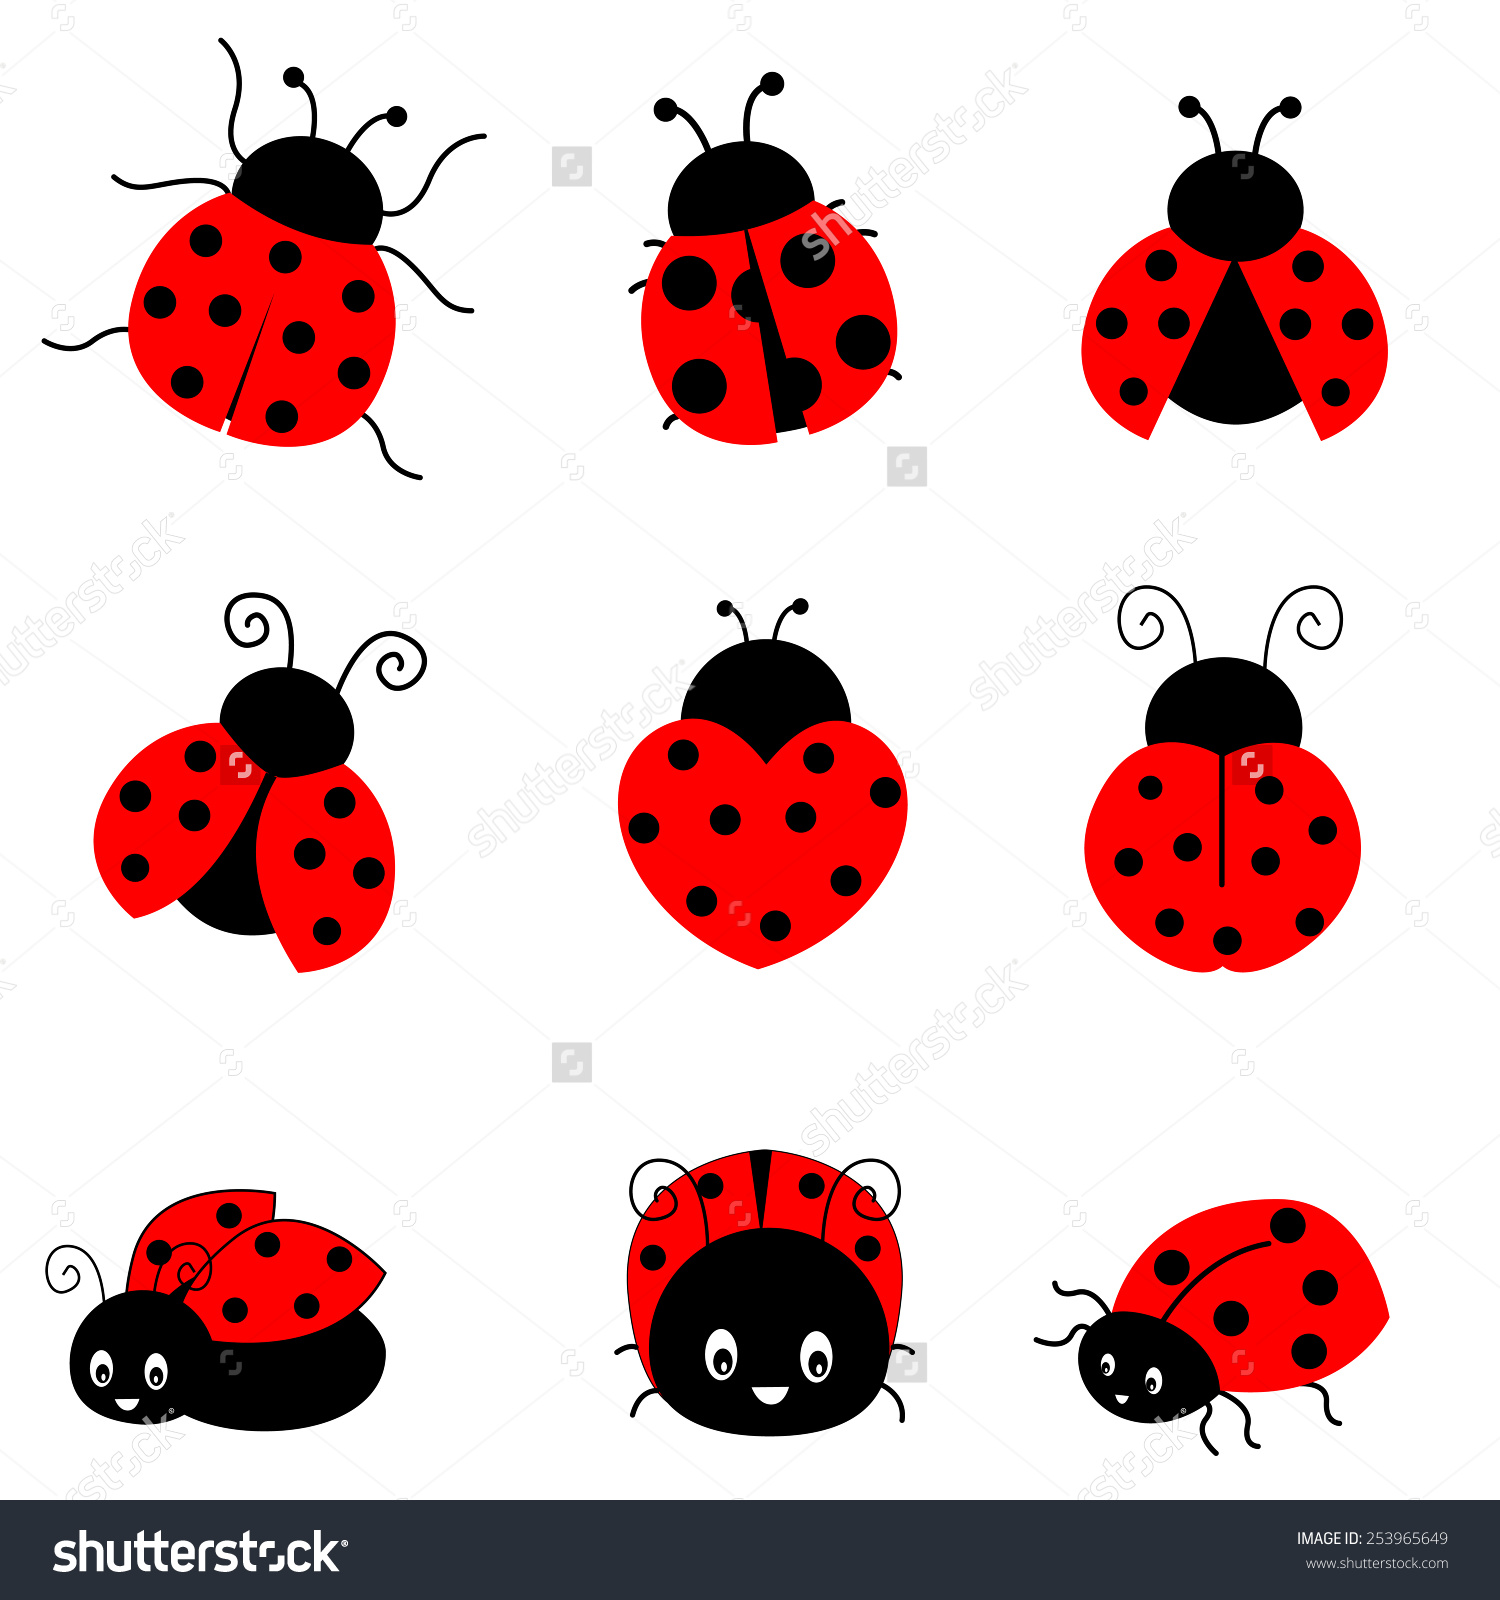 Cute colorful ladybugs clip art collection isolated on white background